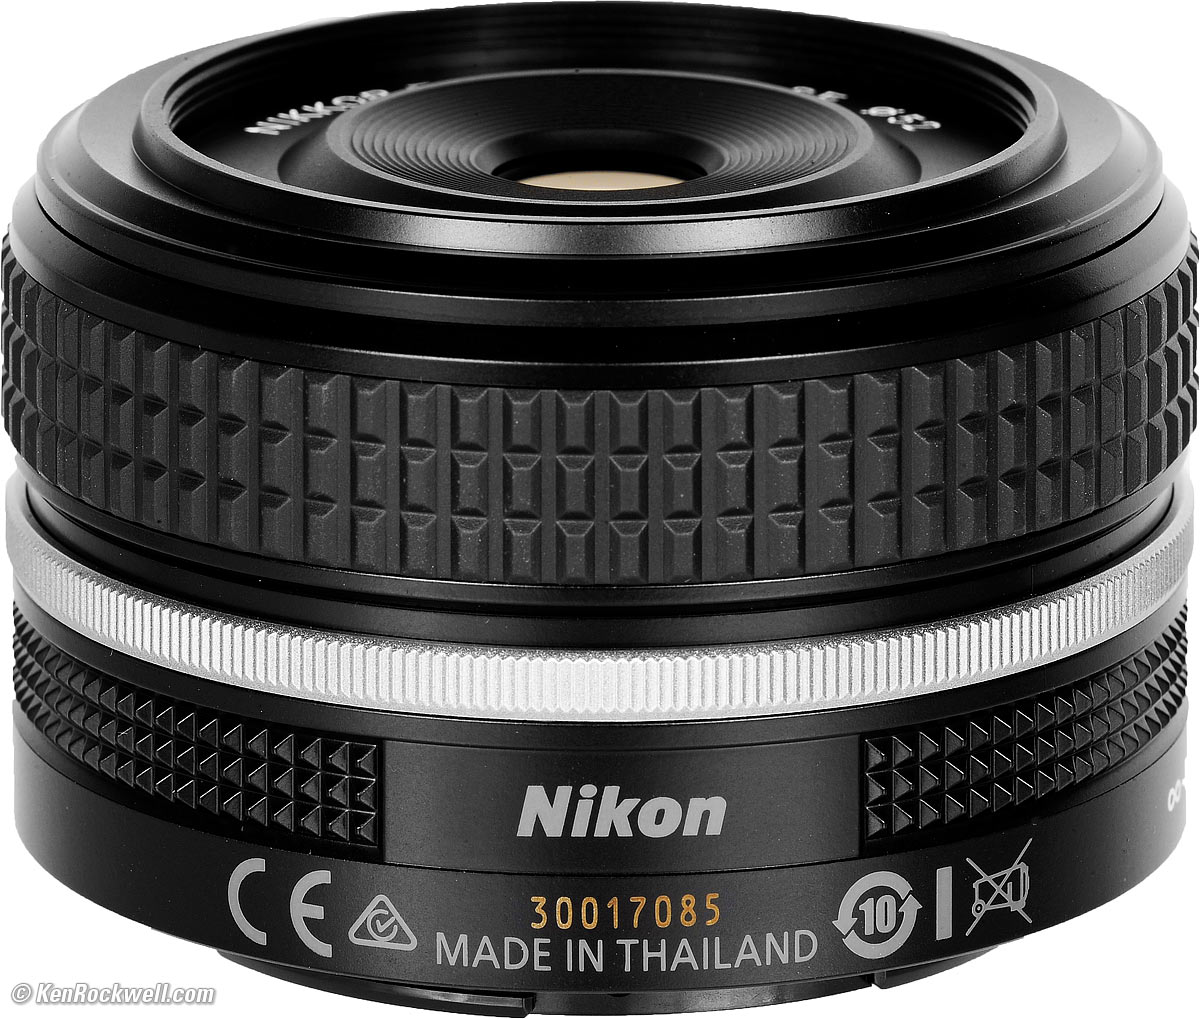 Nikon Z 28mm f/2.8 SE Special Edition Review & Sample Images by 